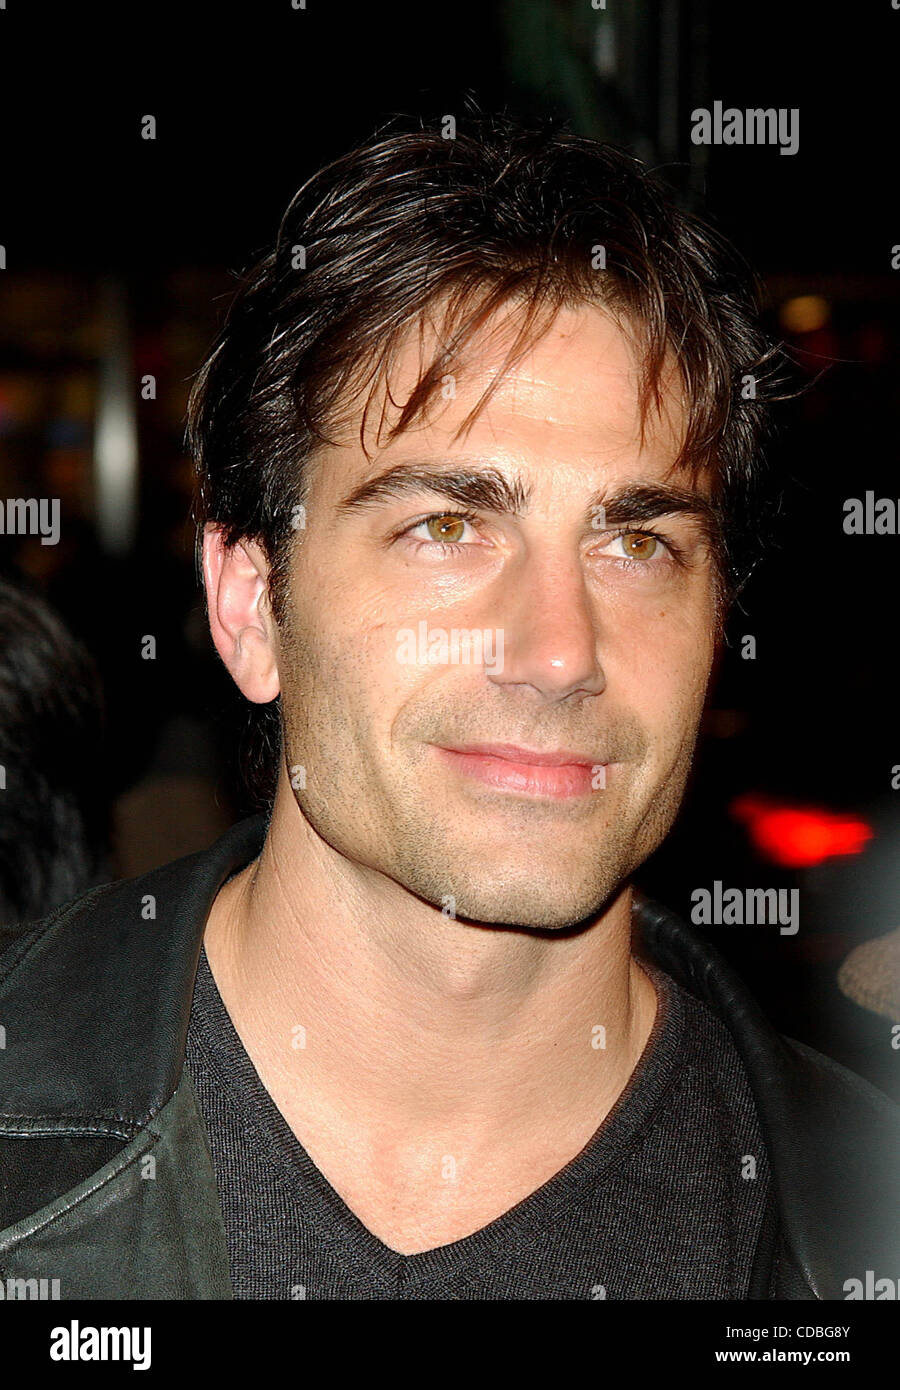 K36495AR.MICHAEL BERGIN ARRIVING AT GREENWICH VILLAGE BARNES & NOBLE TO SIGN COPIES OF HIS BOOK THE OTHER MAN: A LOVE STORY IN NEW YORK New York 4/1/2004.  .    /   2004.(Credit Image: Â© Andrea Renault/Globe Photos/ZUMAPRESS.com) Stock Photo